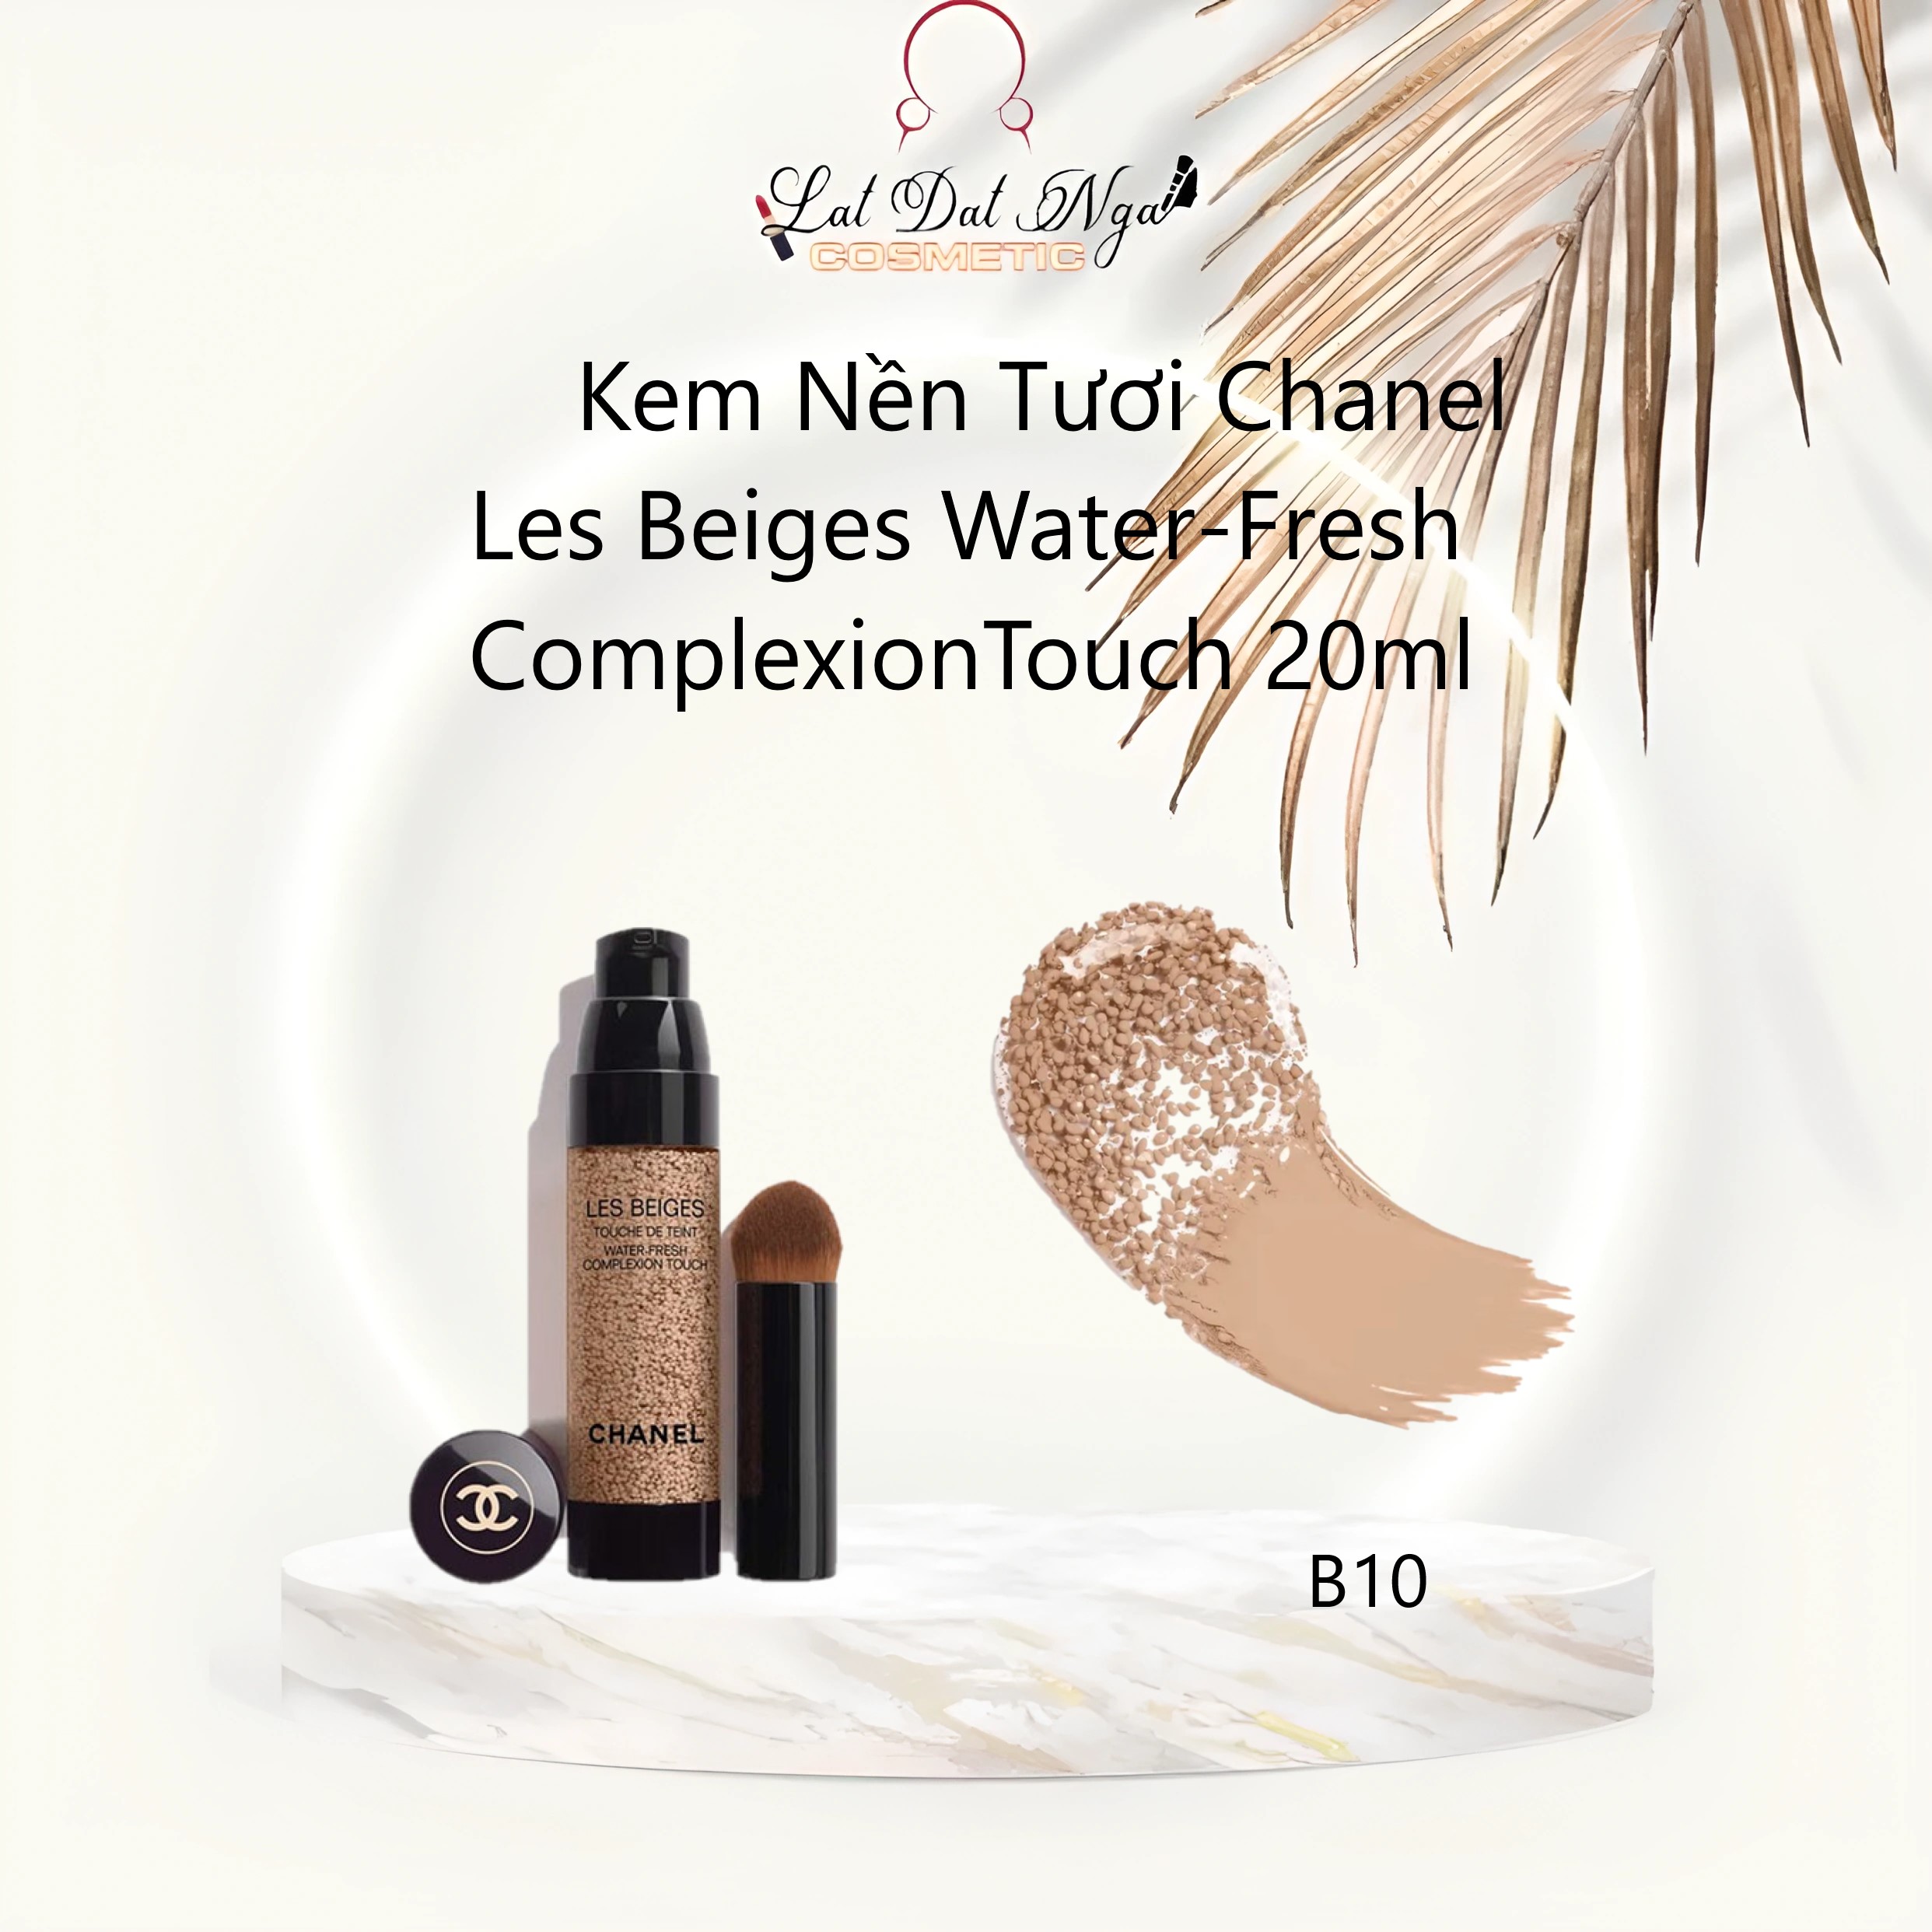  Chanel Les Beiges Water Fresh Complexion Touch - B10